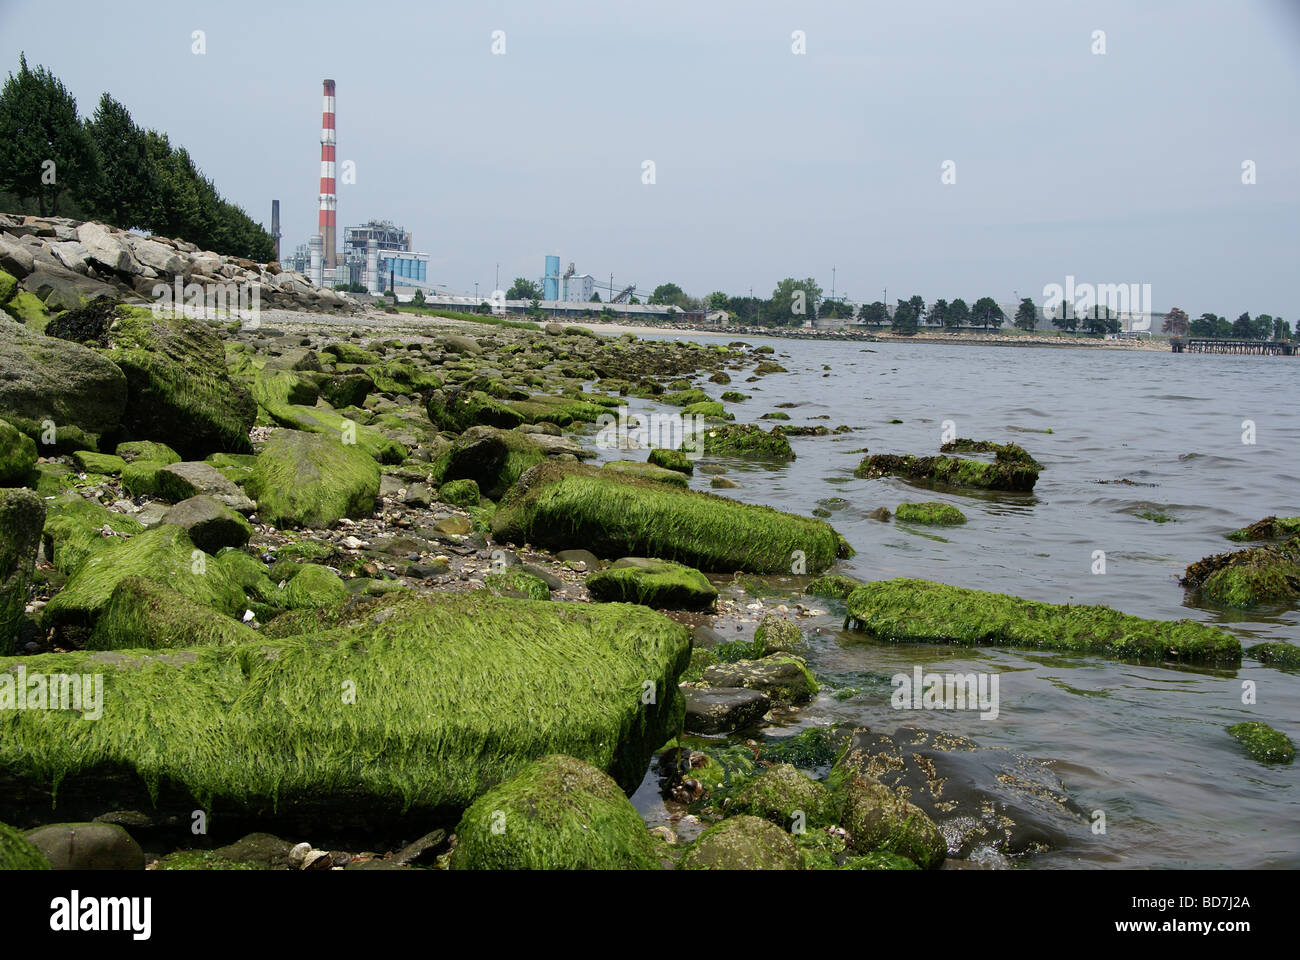 Moss covered rocks on a beach with a factory and a smokestack in the background Stock Photo